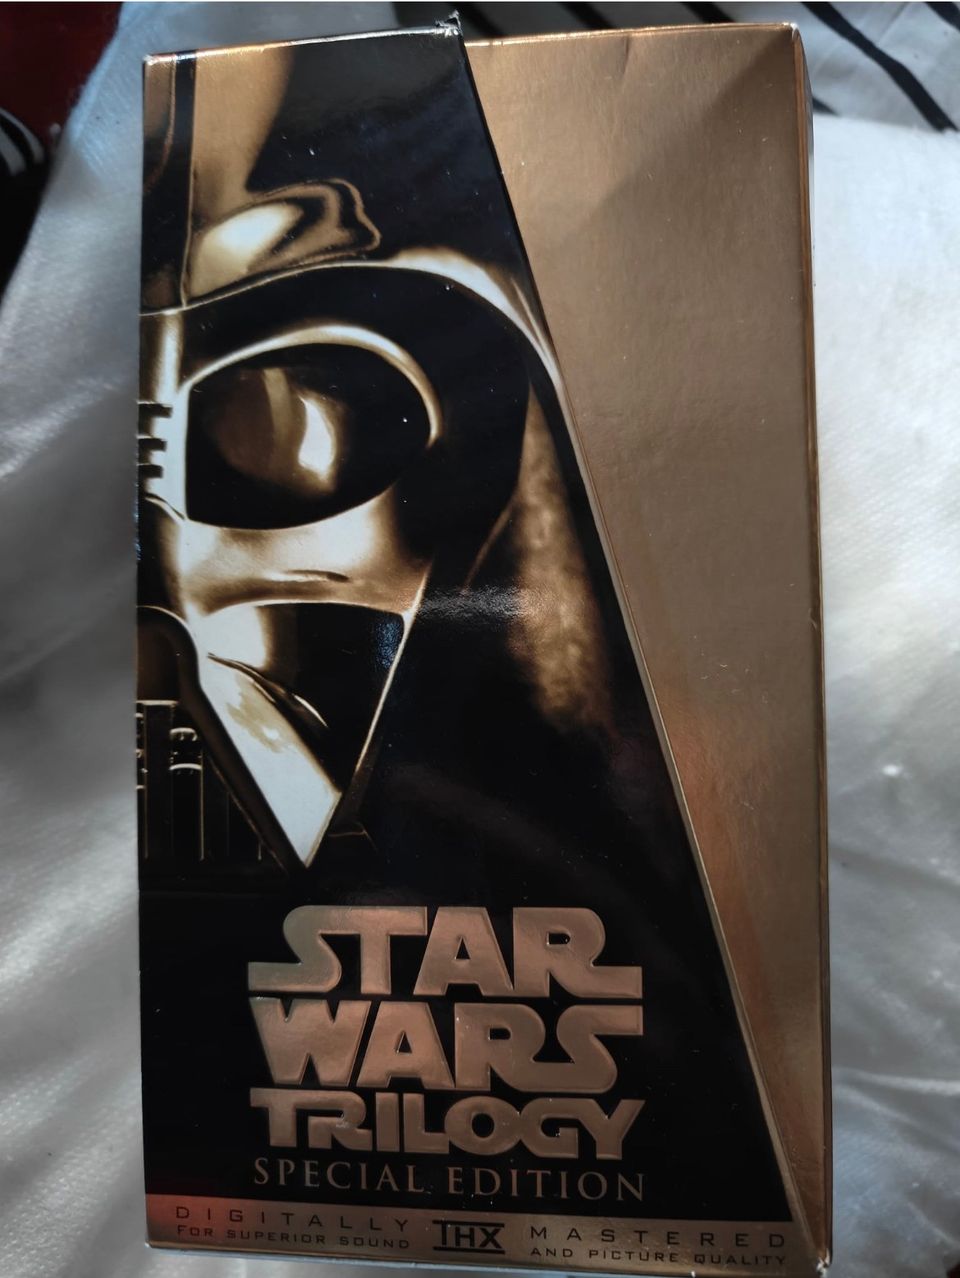 Star Wars trilogy VHS kultainen special edition